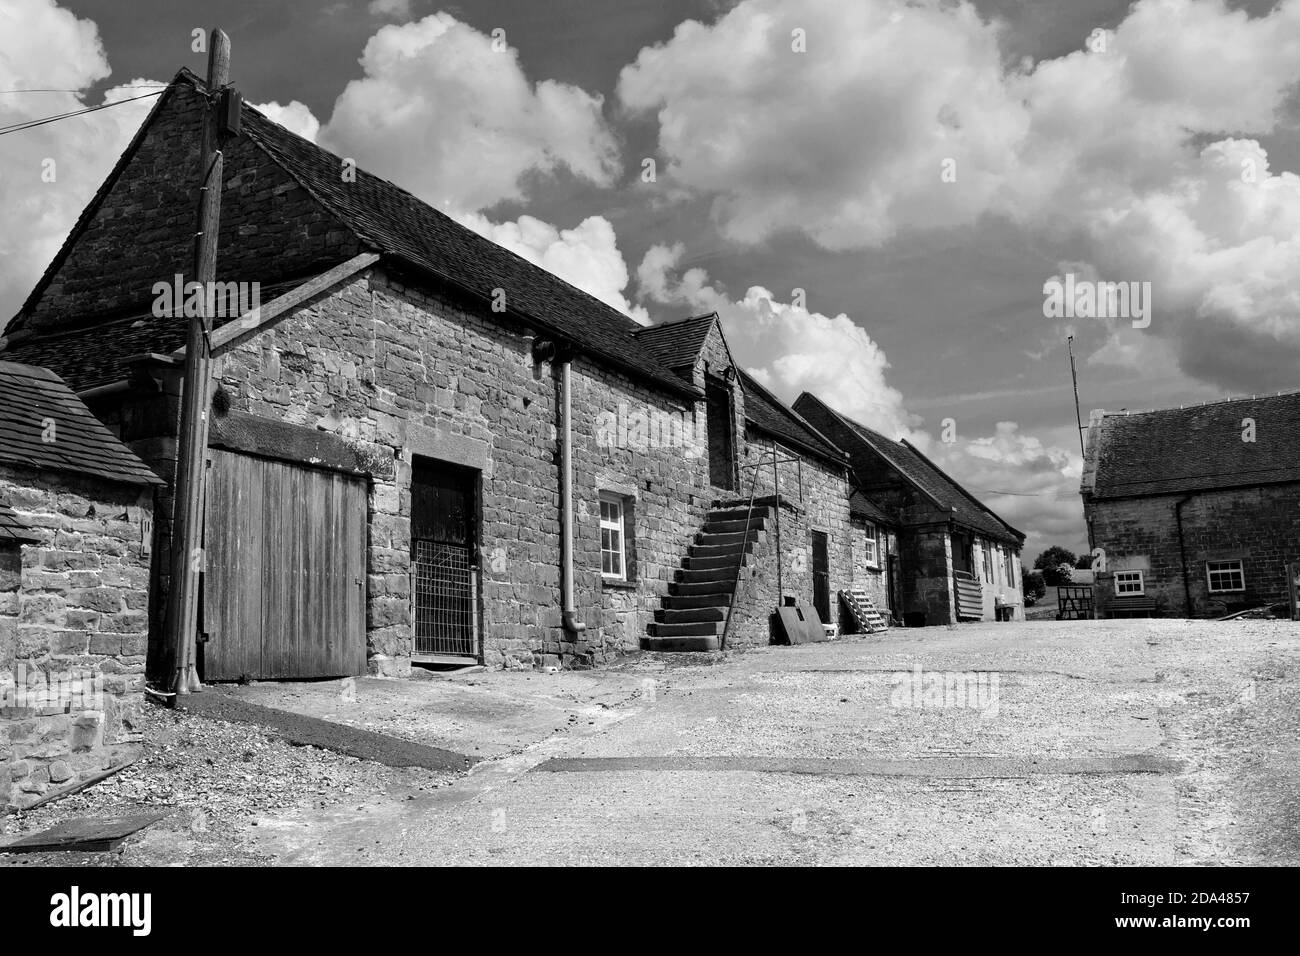 Derbyshire dales Black and White Stock Photos & Images - Alamy